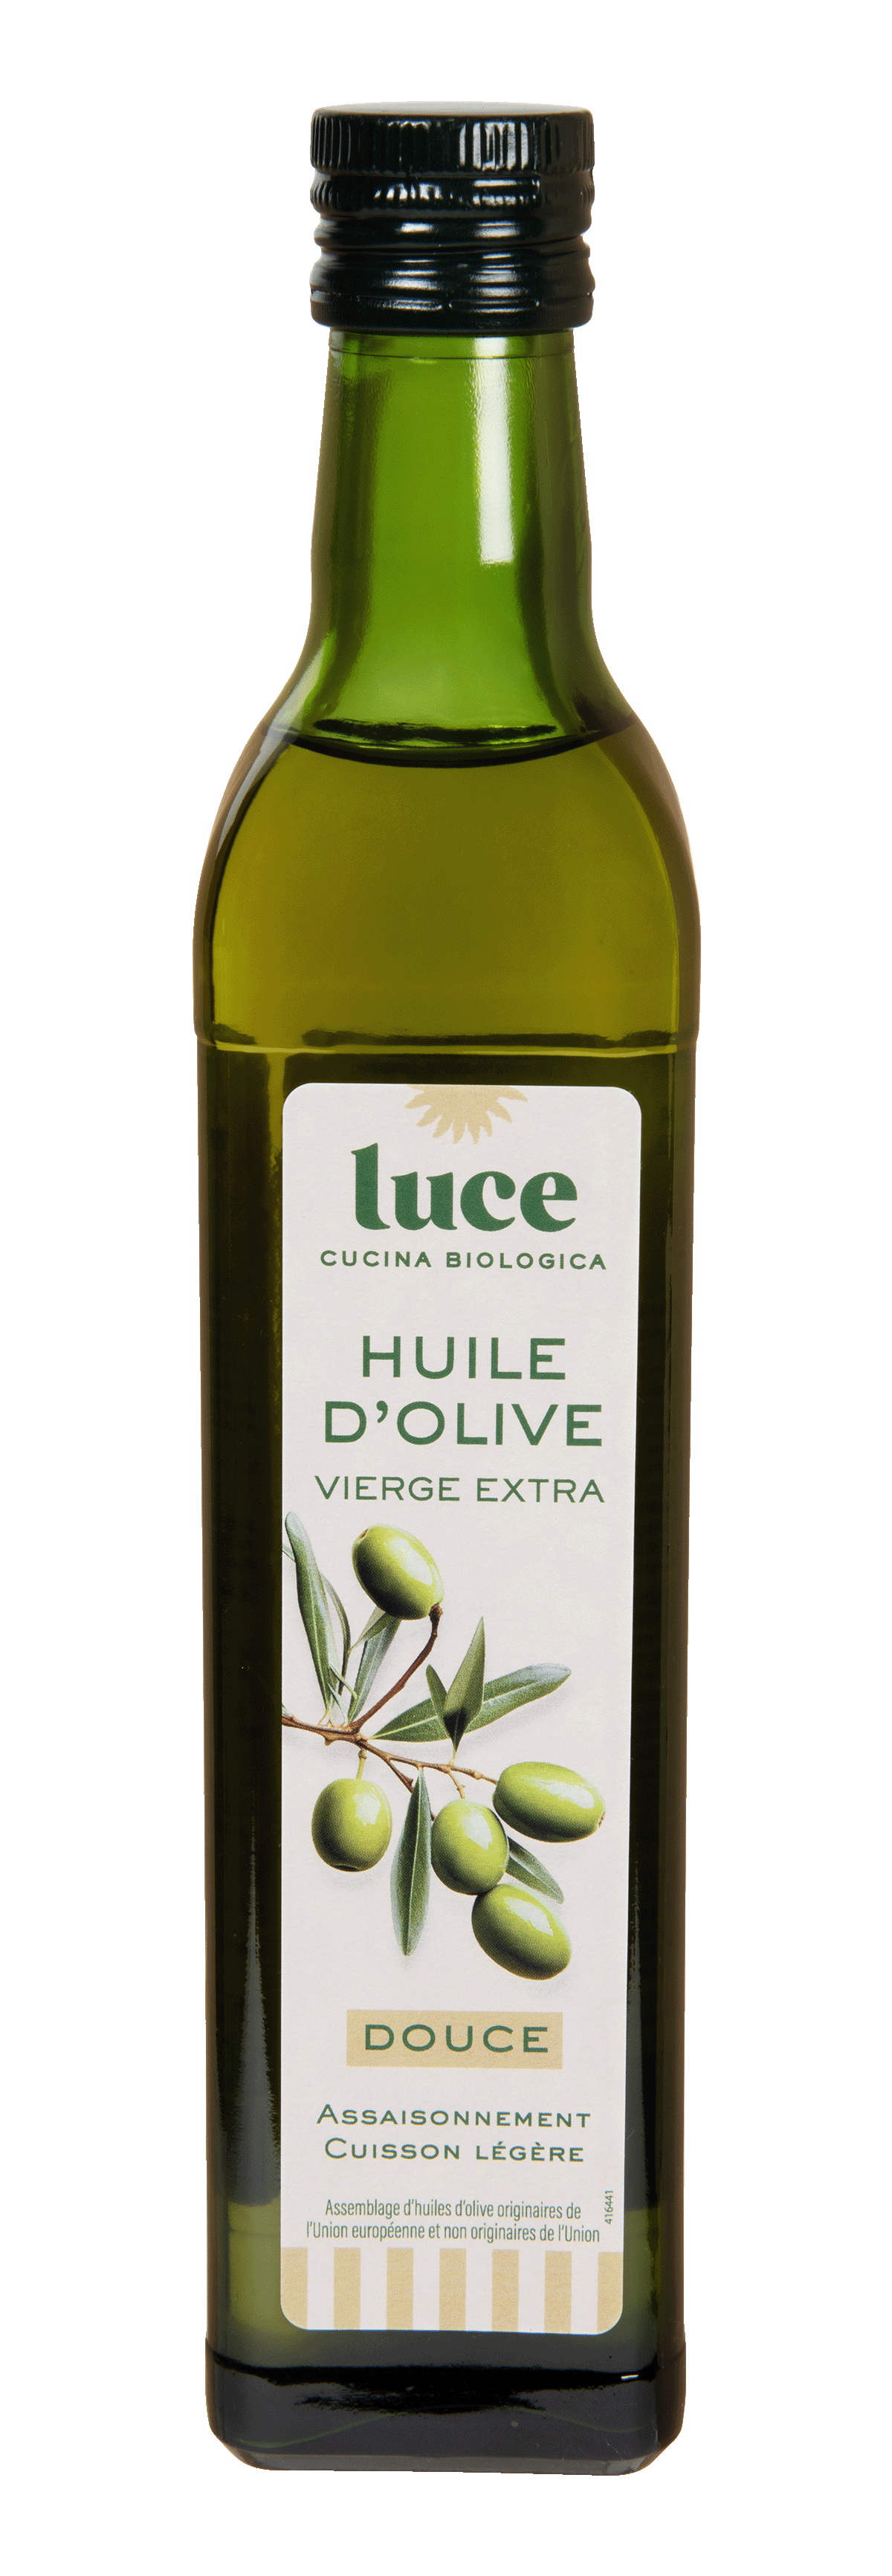 Huile d'olive vierge extra douce